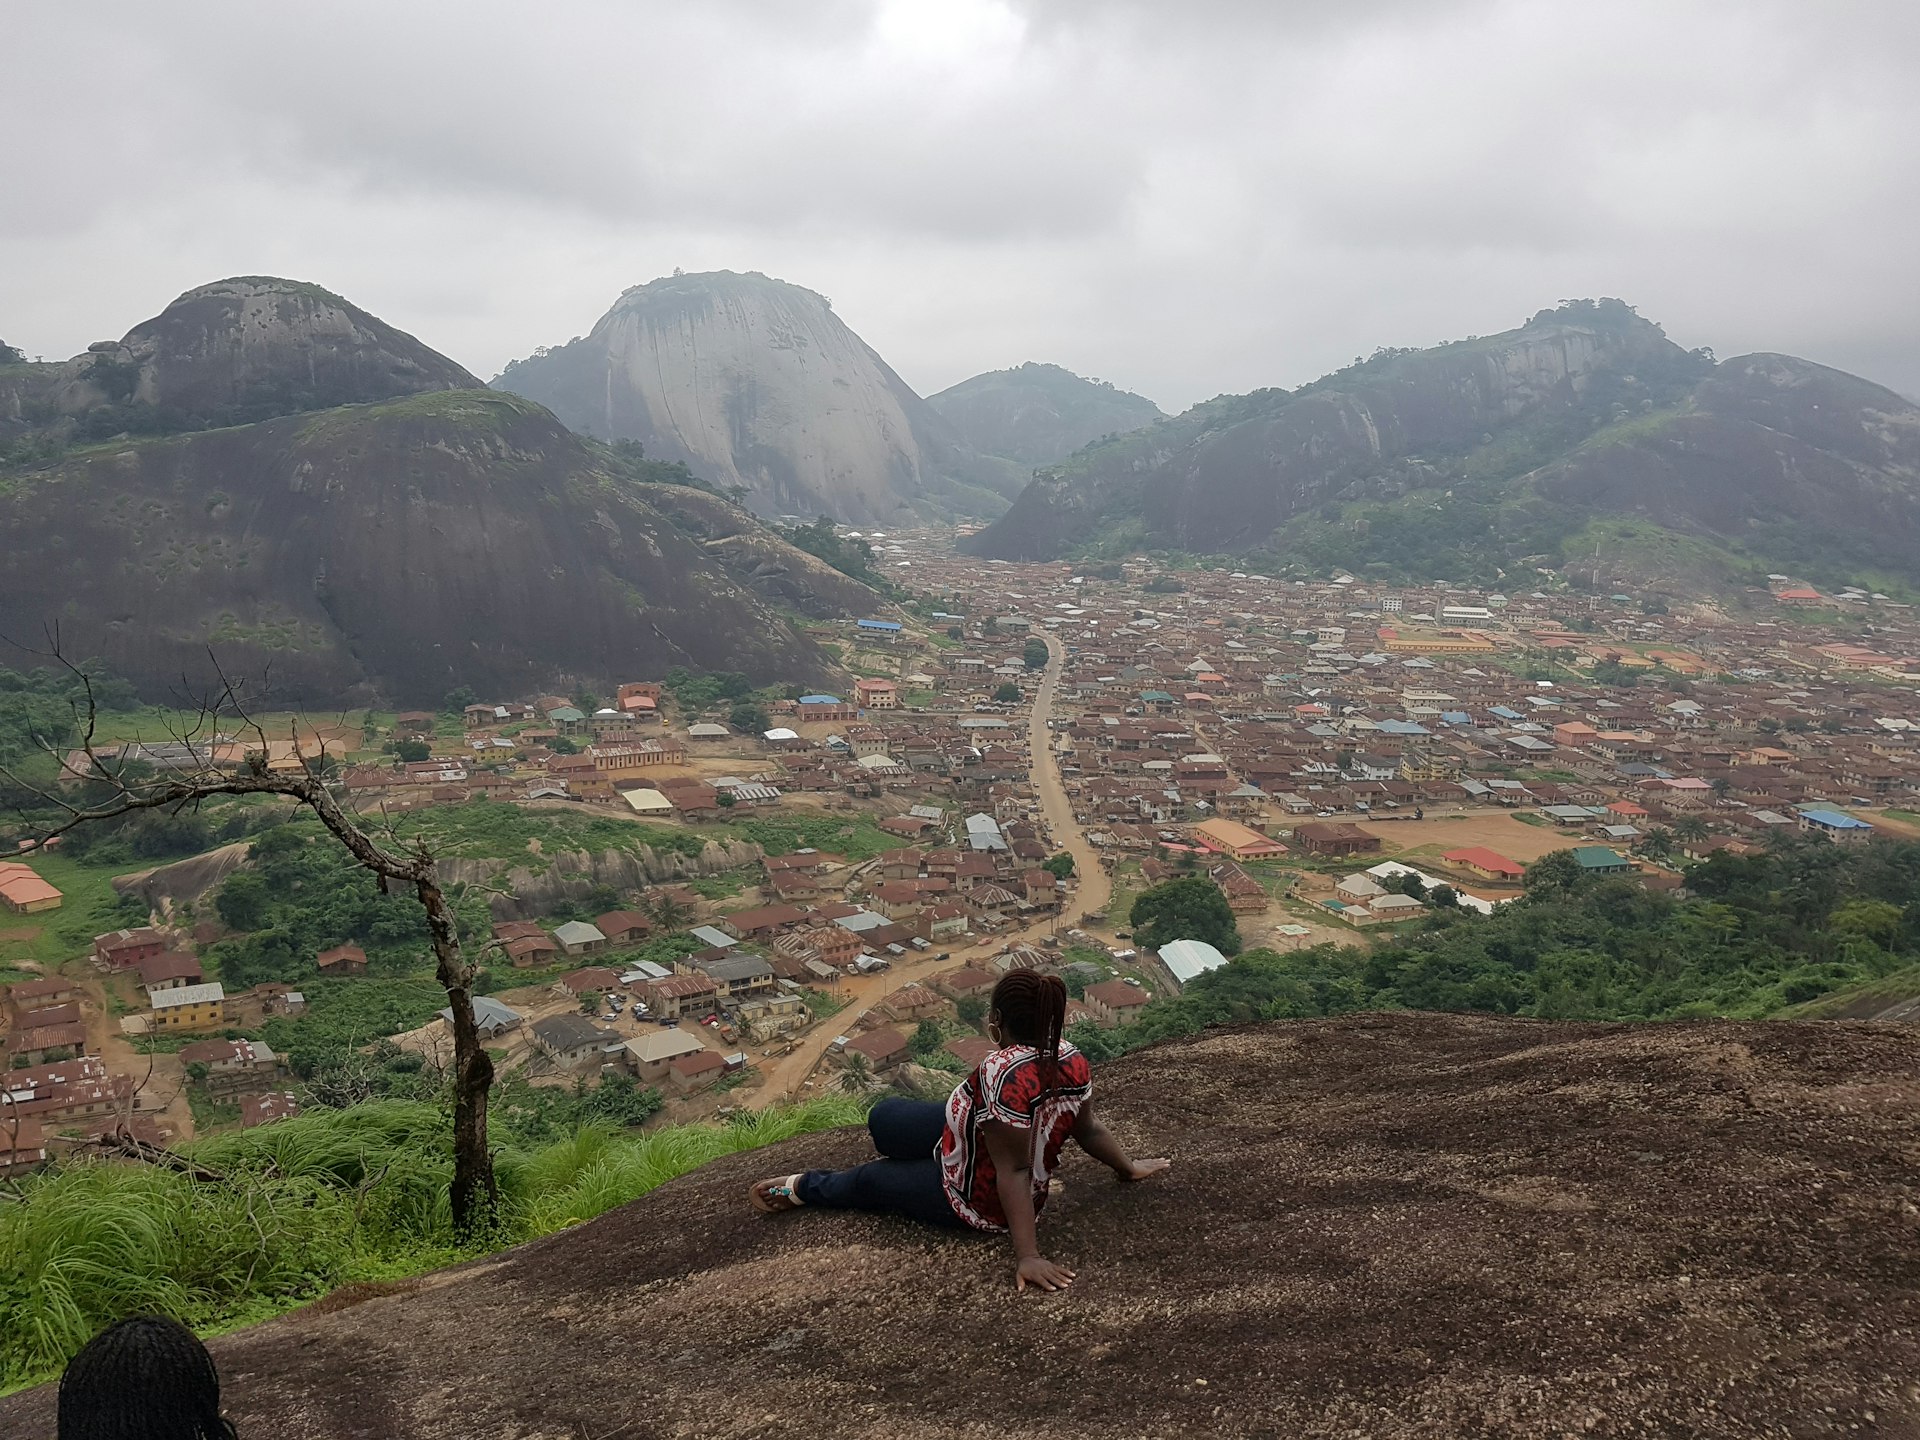 A woman sits on the edge of a viewpoint looking out to the red roofs of the settelments below the surrounding hills 